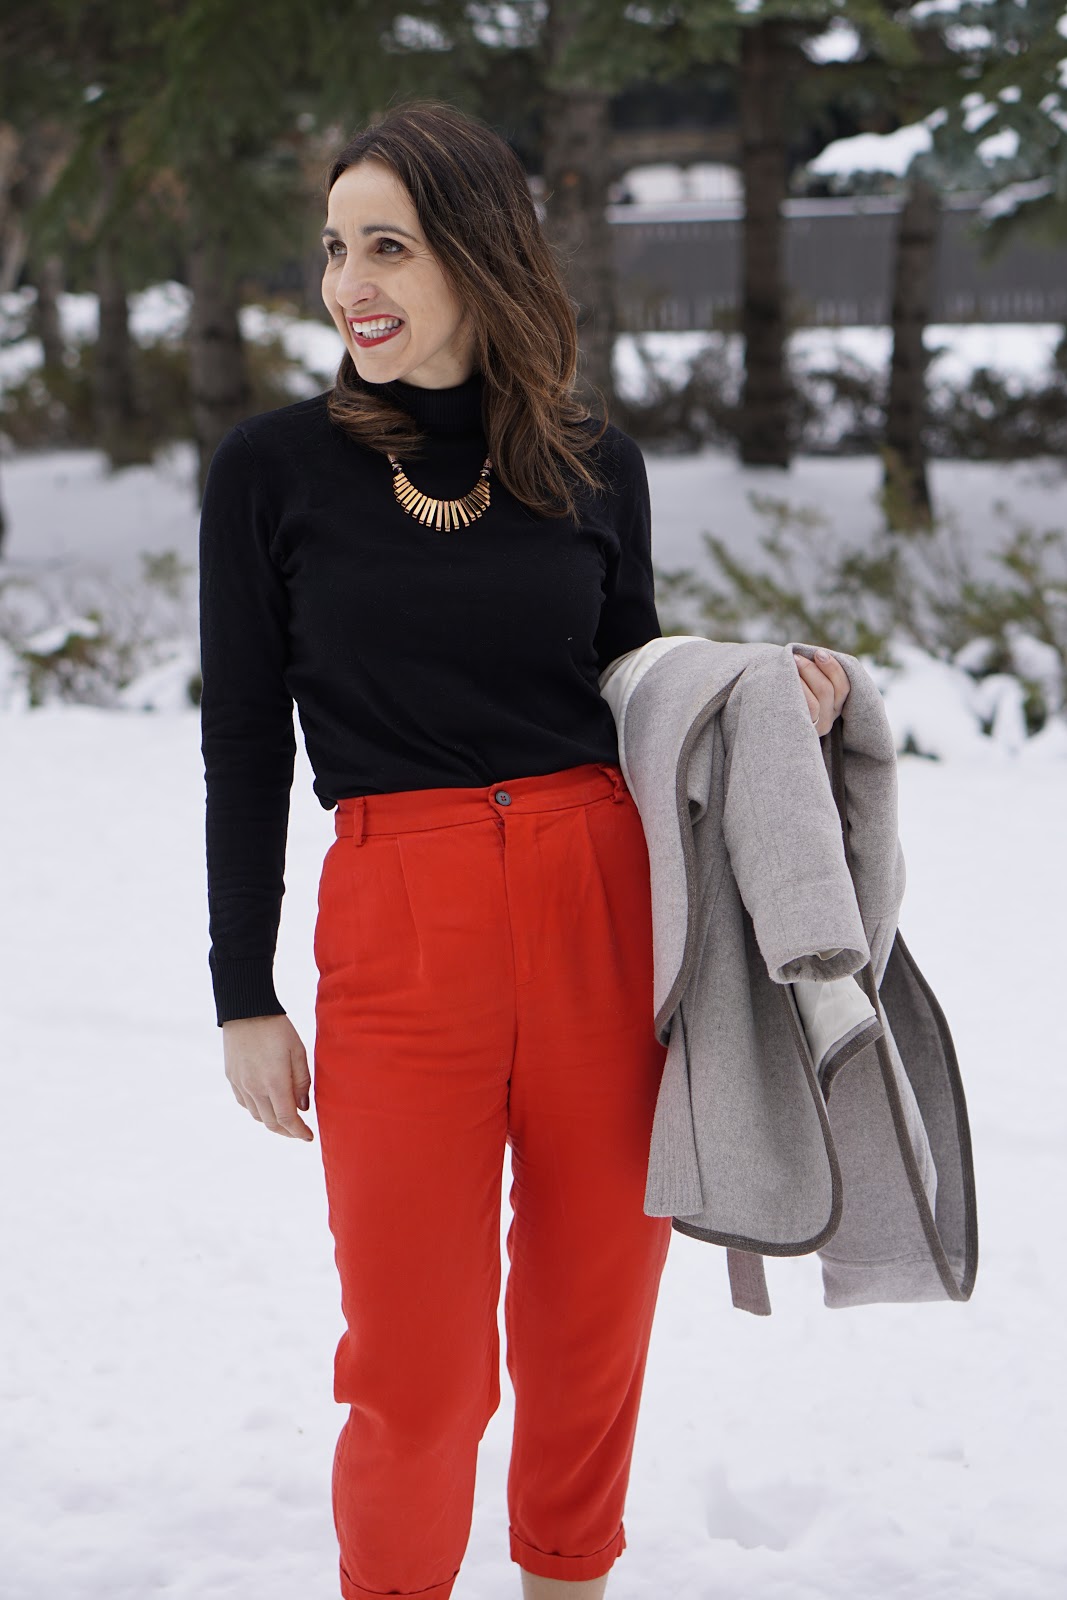 Bo's Bodacious Blog: Red Pants for Valentines Day, or Any Other Day